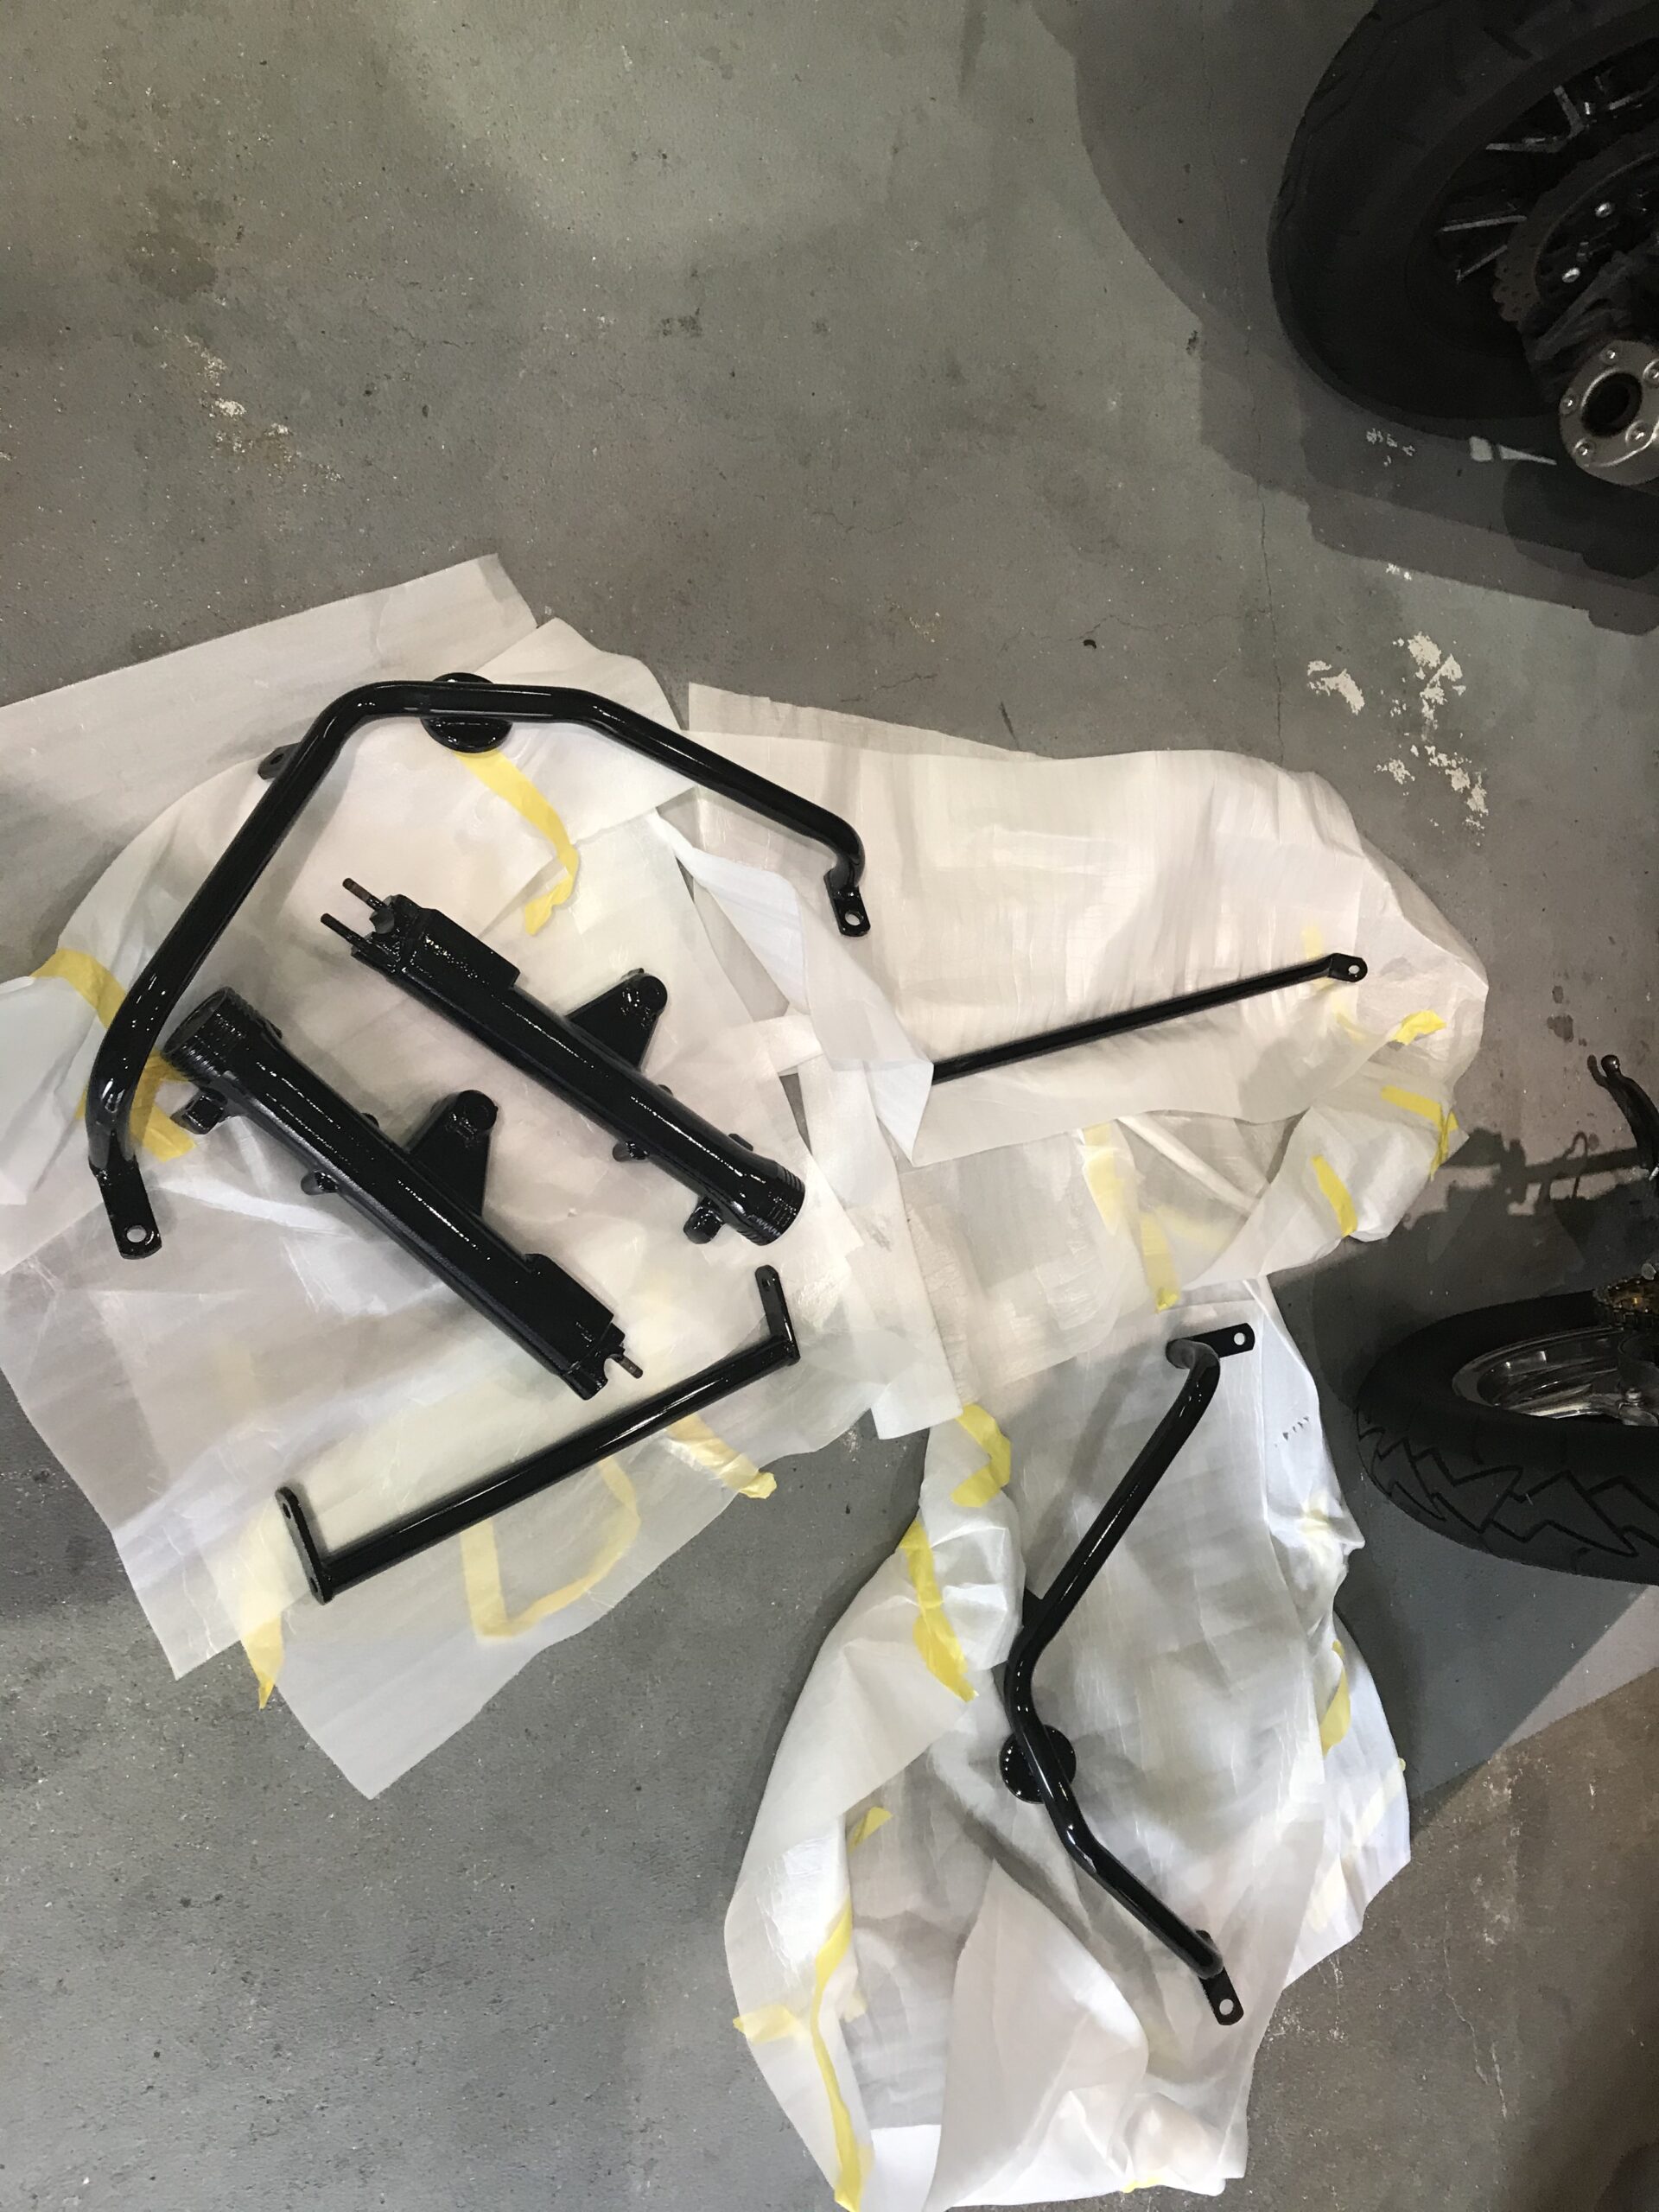 HONDA CBX1000-Subframe style engine guard after repaint